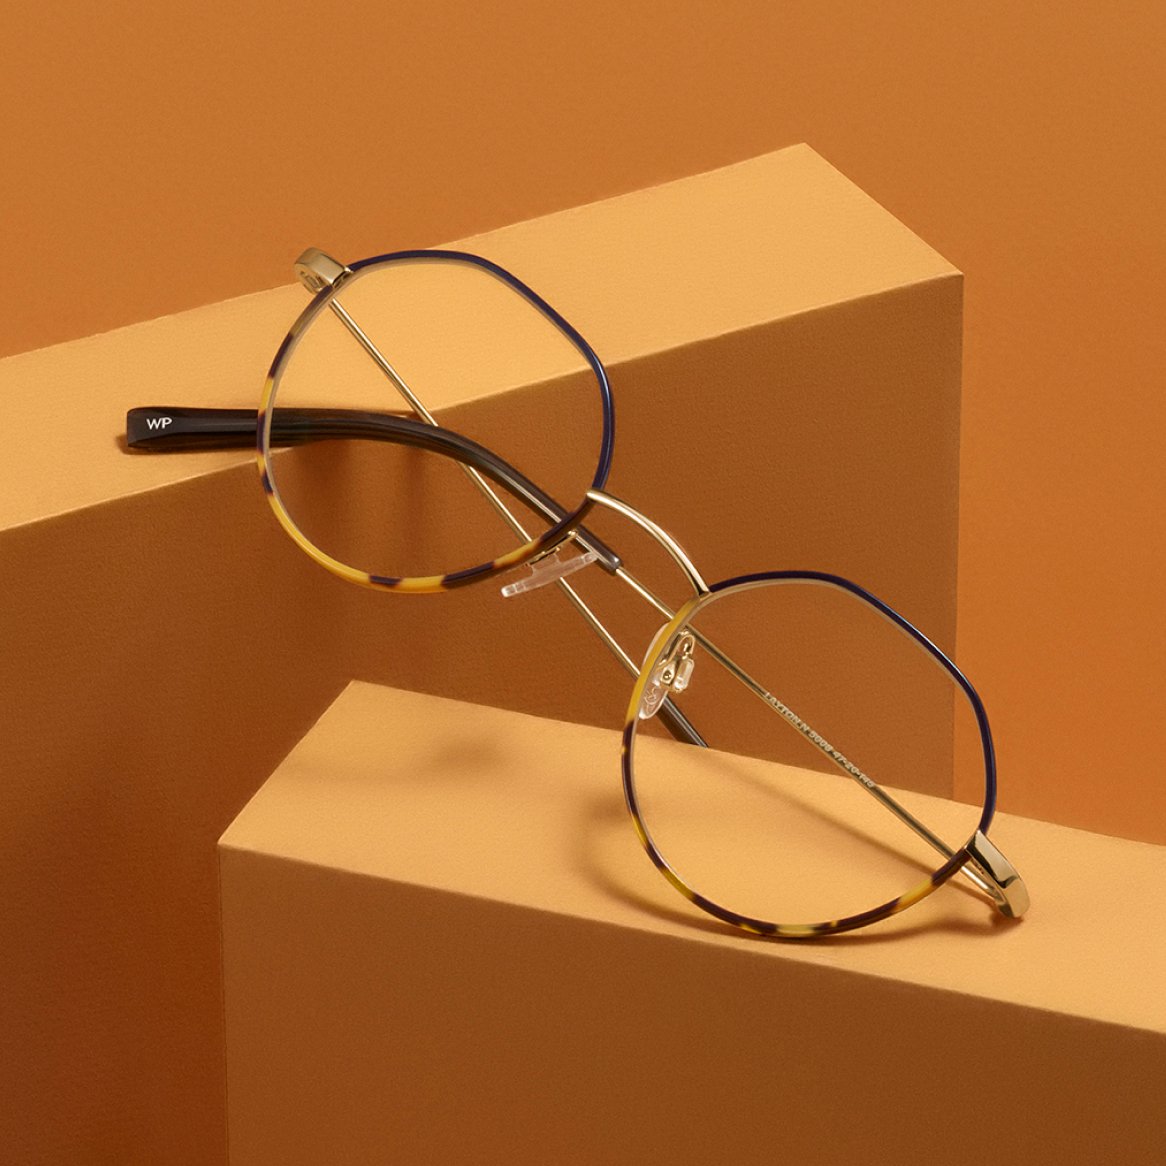 Close-up image of a pair of glasses